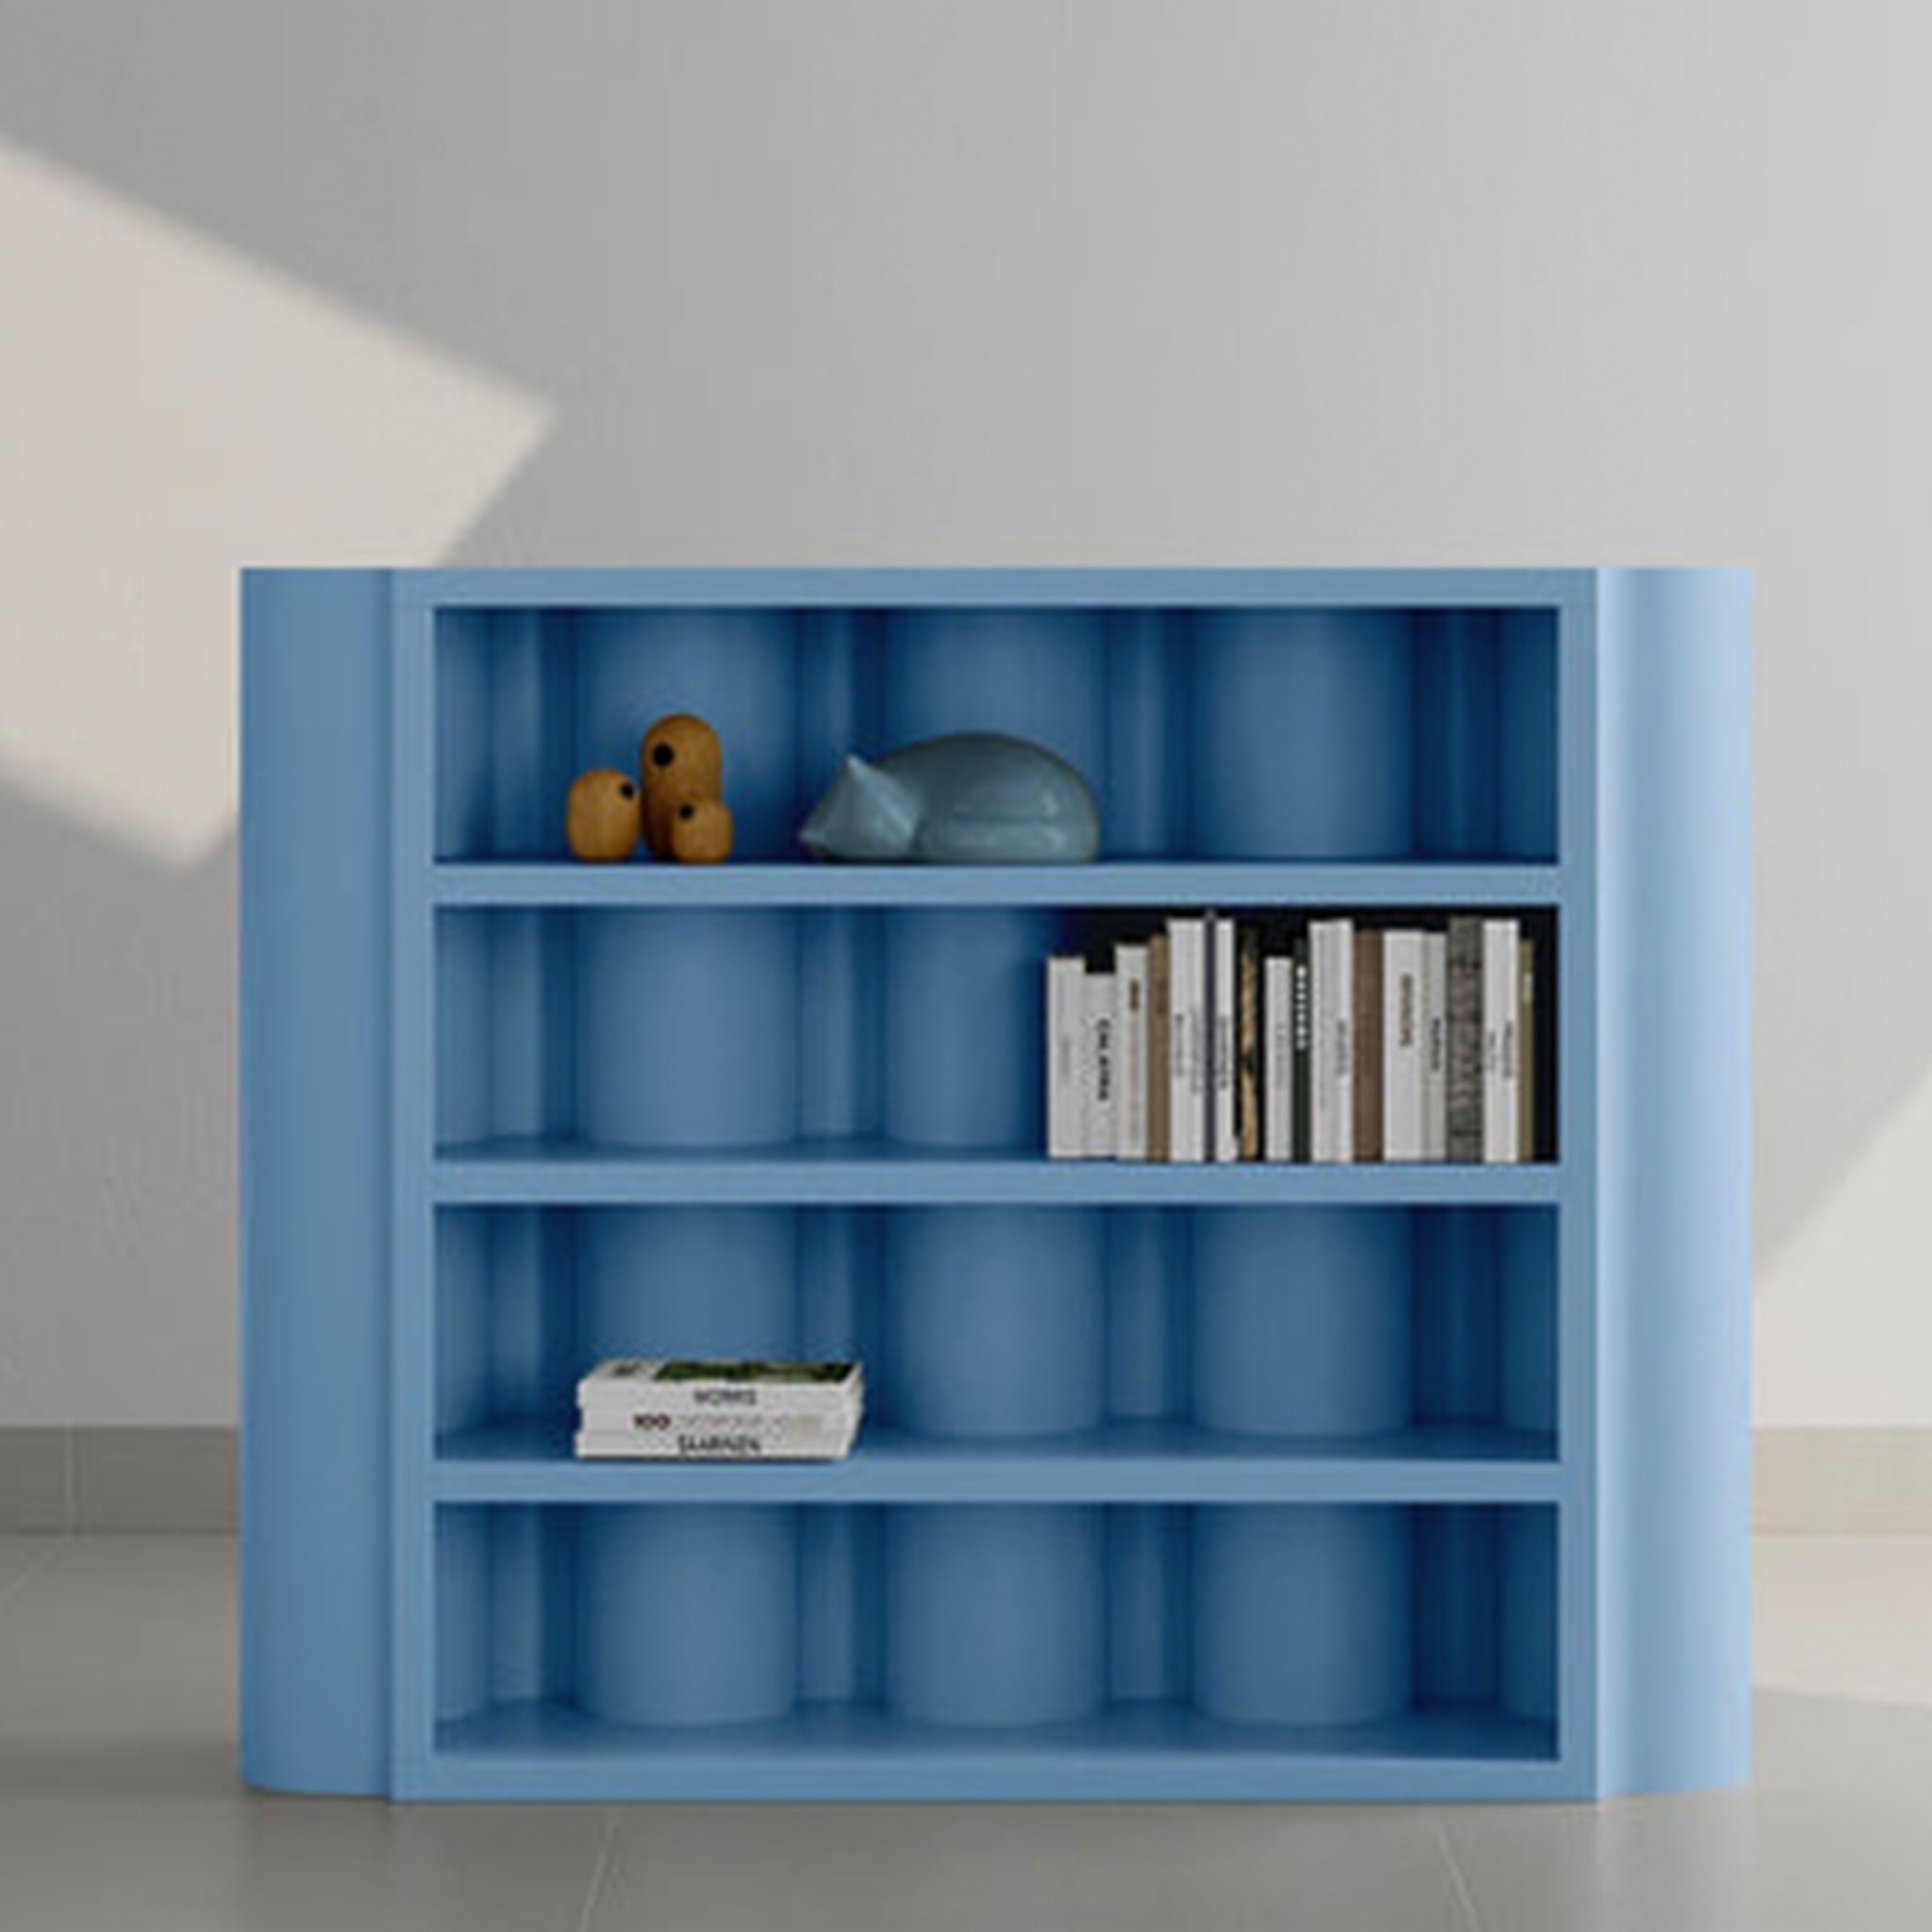 A modern blue bookcase with curved sides, featuring a selection of books and decorative items on its shelves.